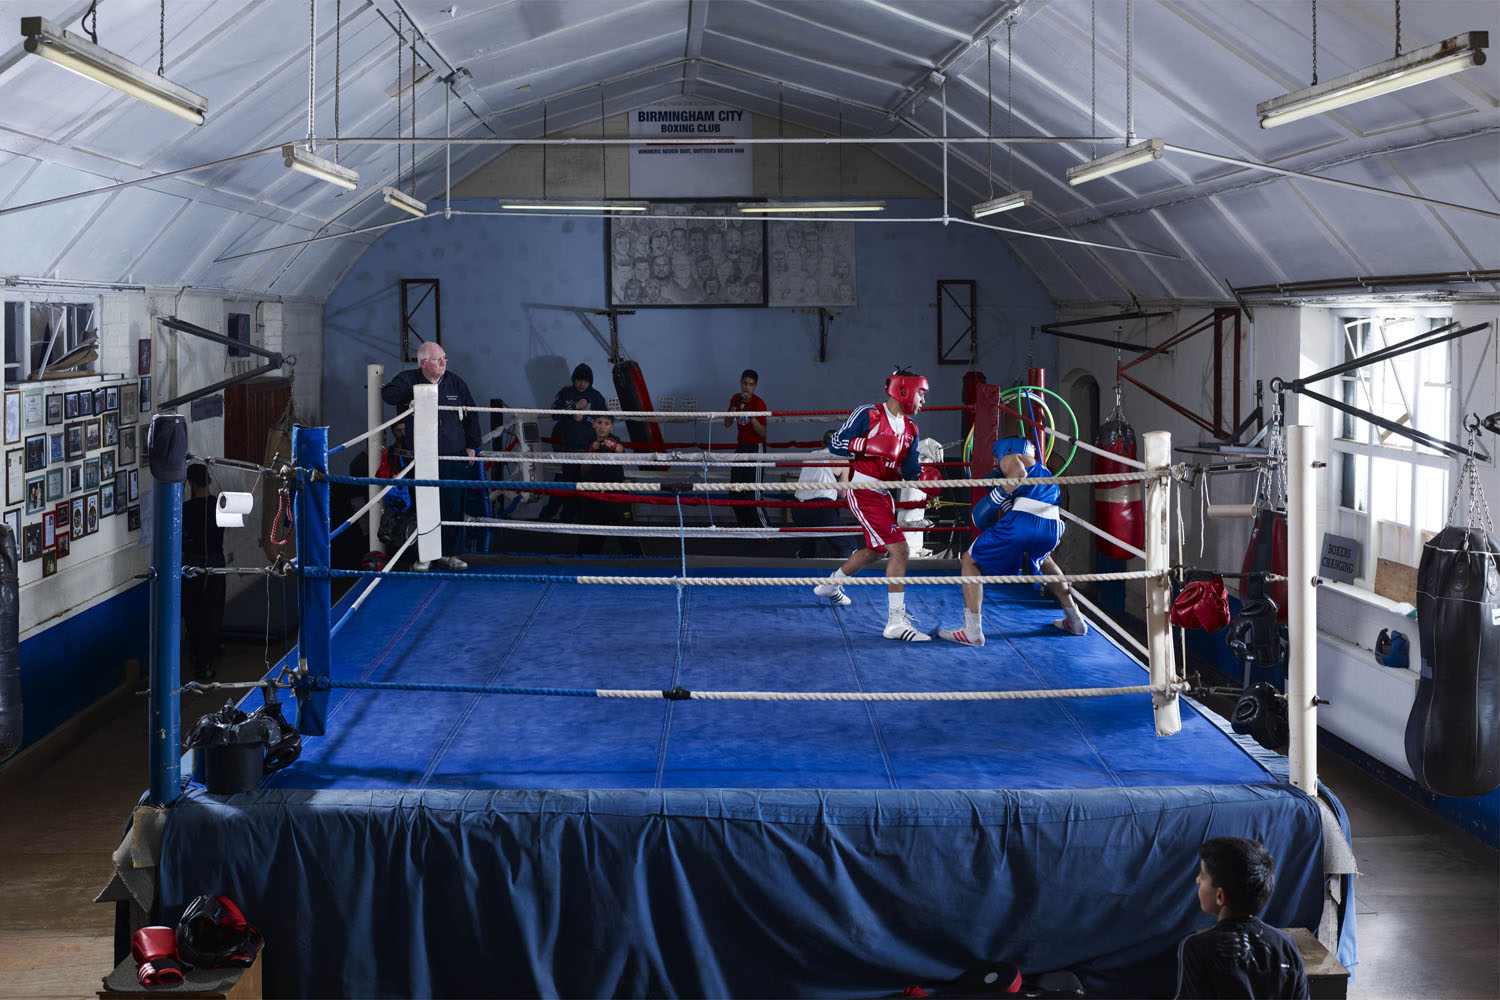 Khalid Yafai and Frank O'Sullivan, members of the British boxing team, spar at their local gym.